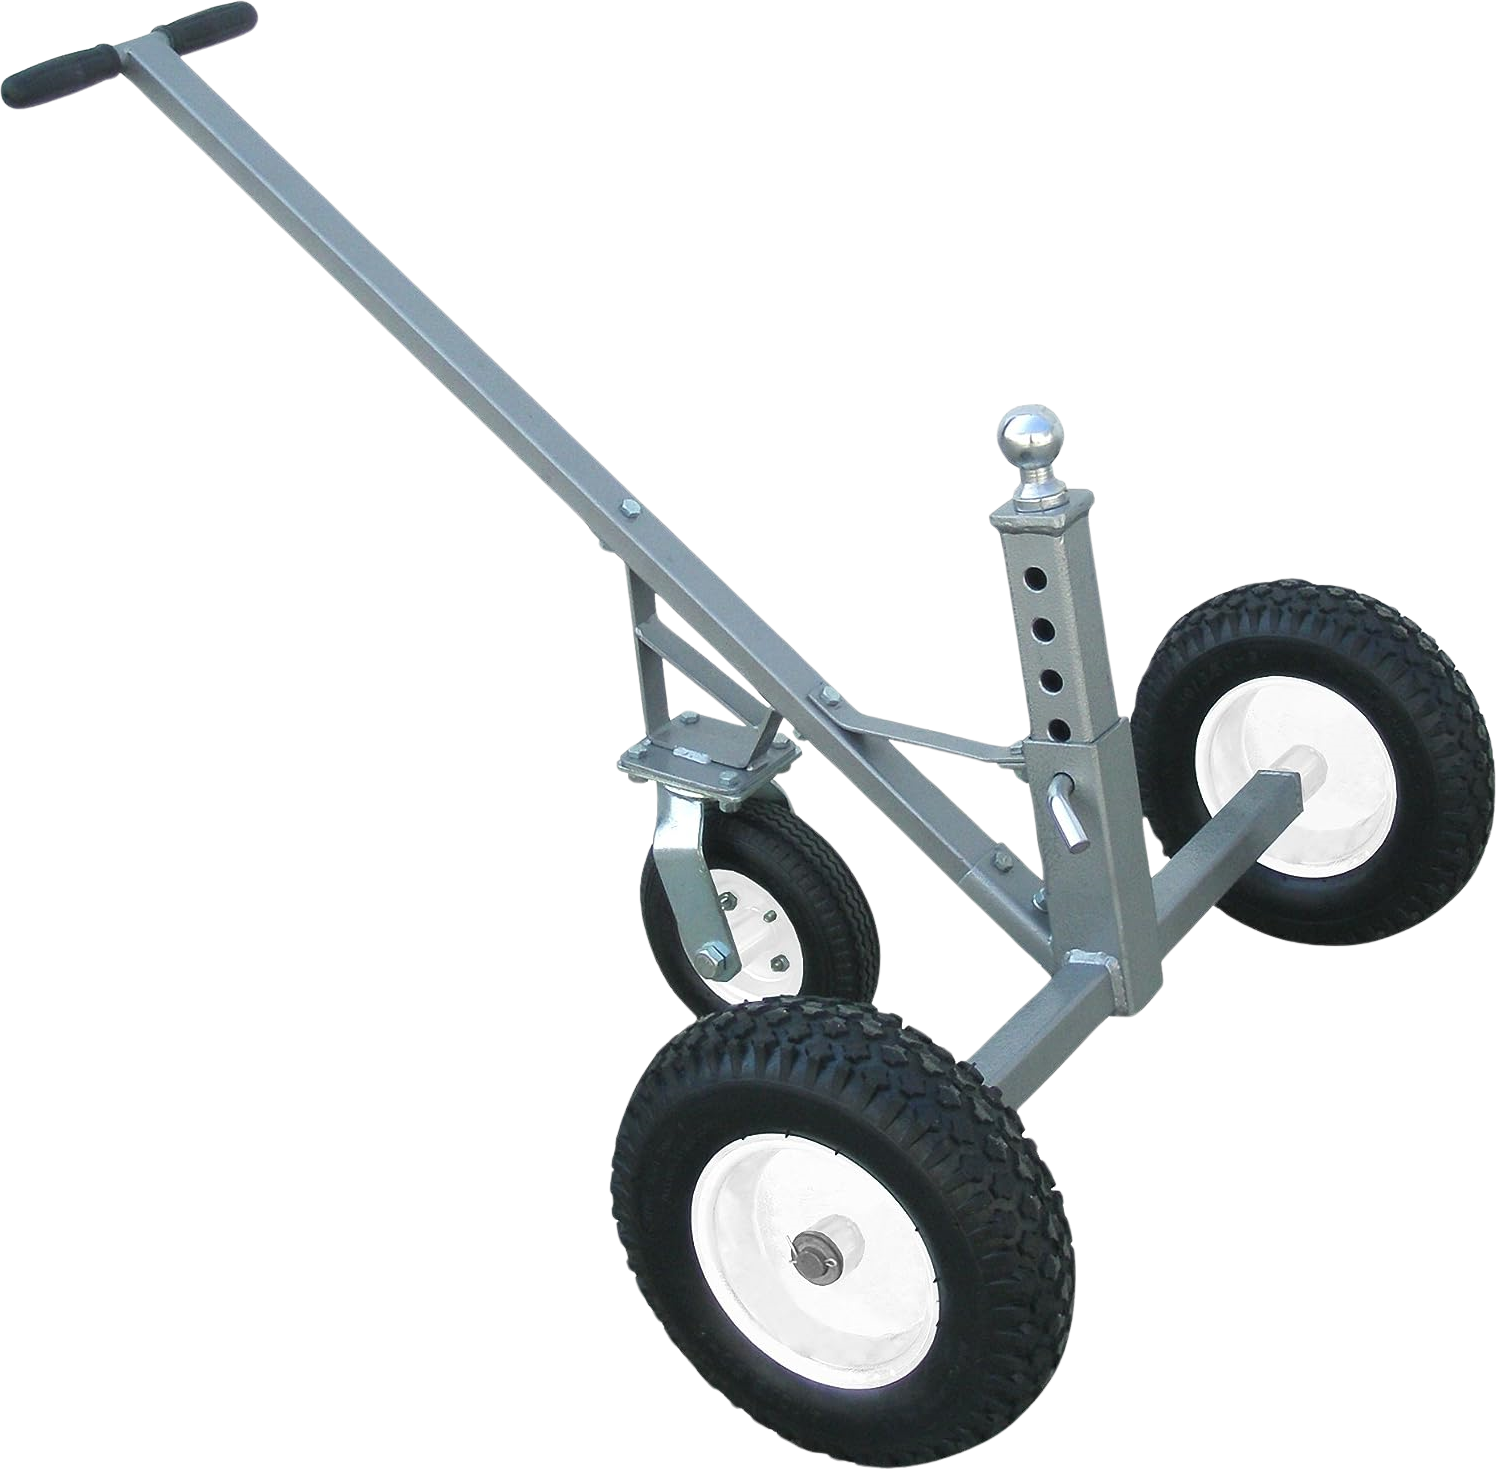 Tow Tuff, Tow Tuff TMD-800C Trailer Dolly Standard Adjustable 16.5" to 25.5" Max Weight 800lbs Works with 1 7/8" Coupler or Larger New